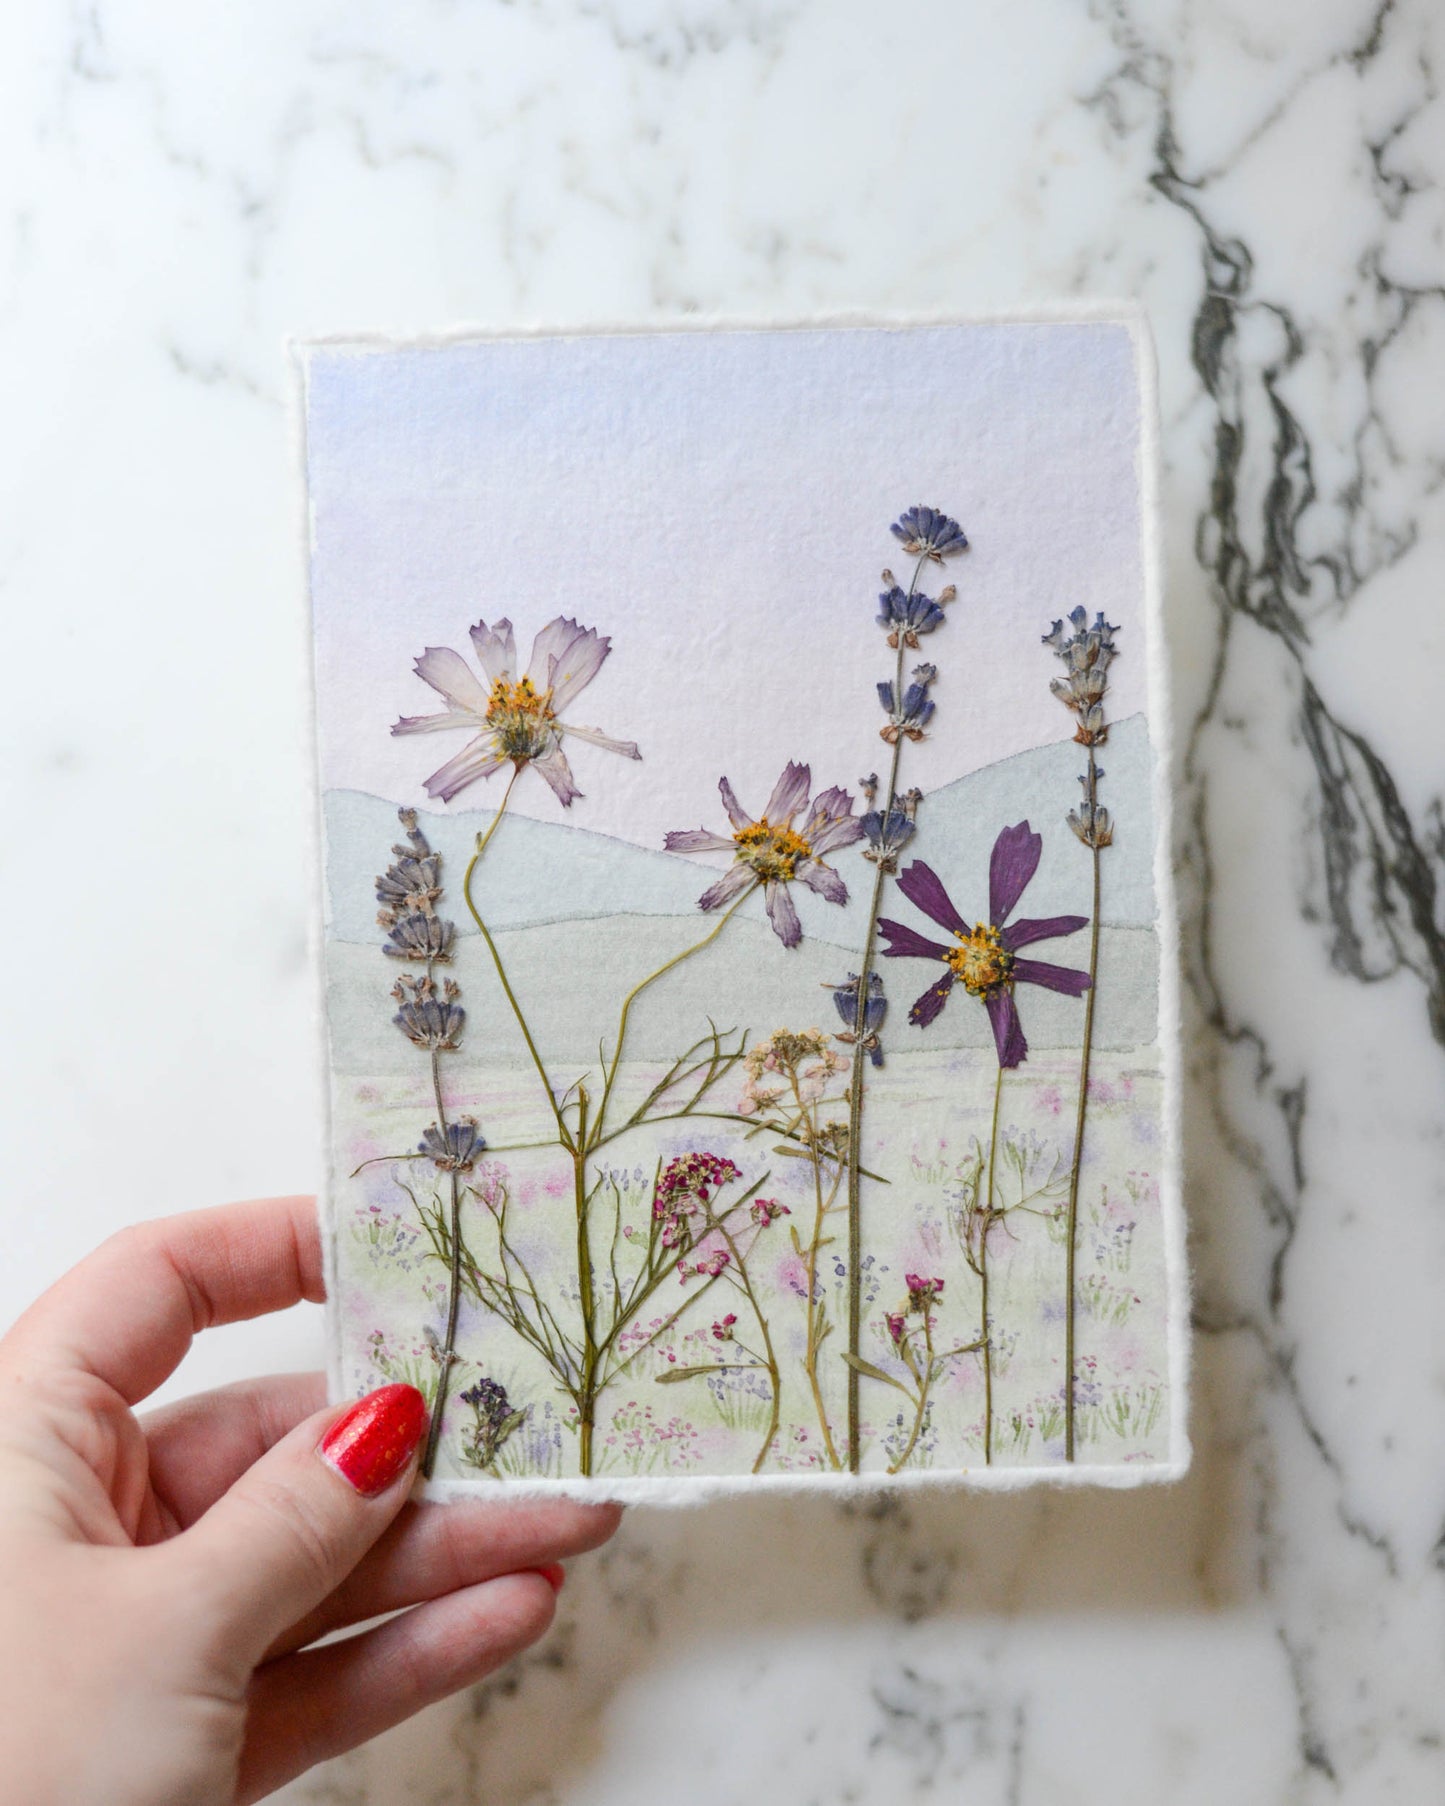 Summer in the Mountains - Original Artwork, 5x7" Watercolor and Pressed Flowers